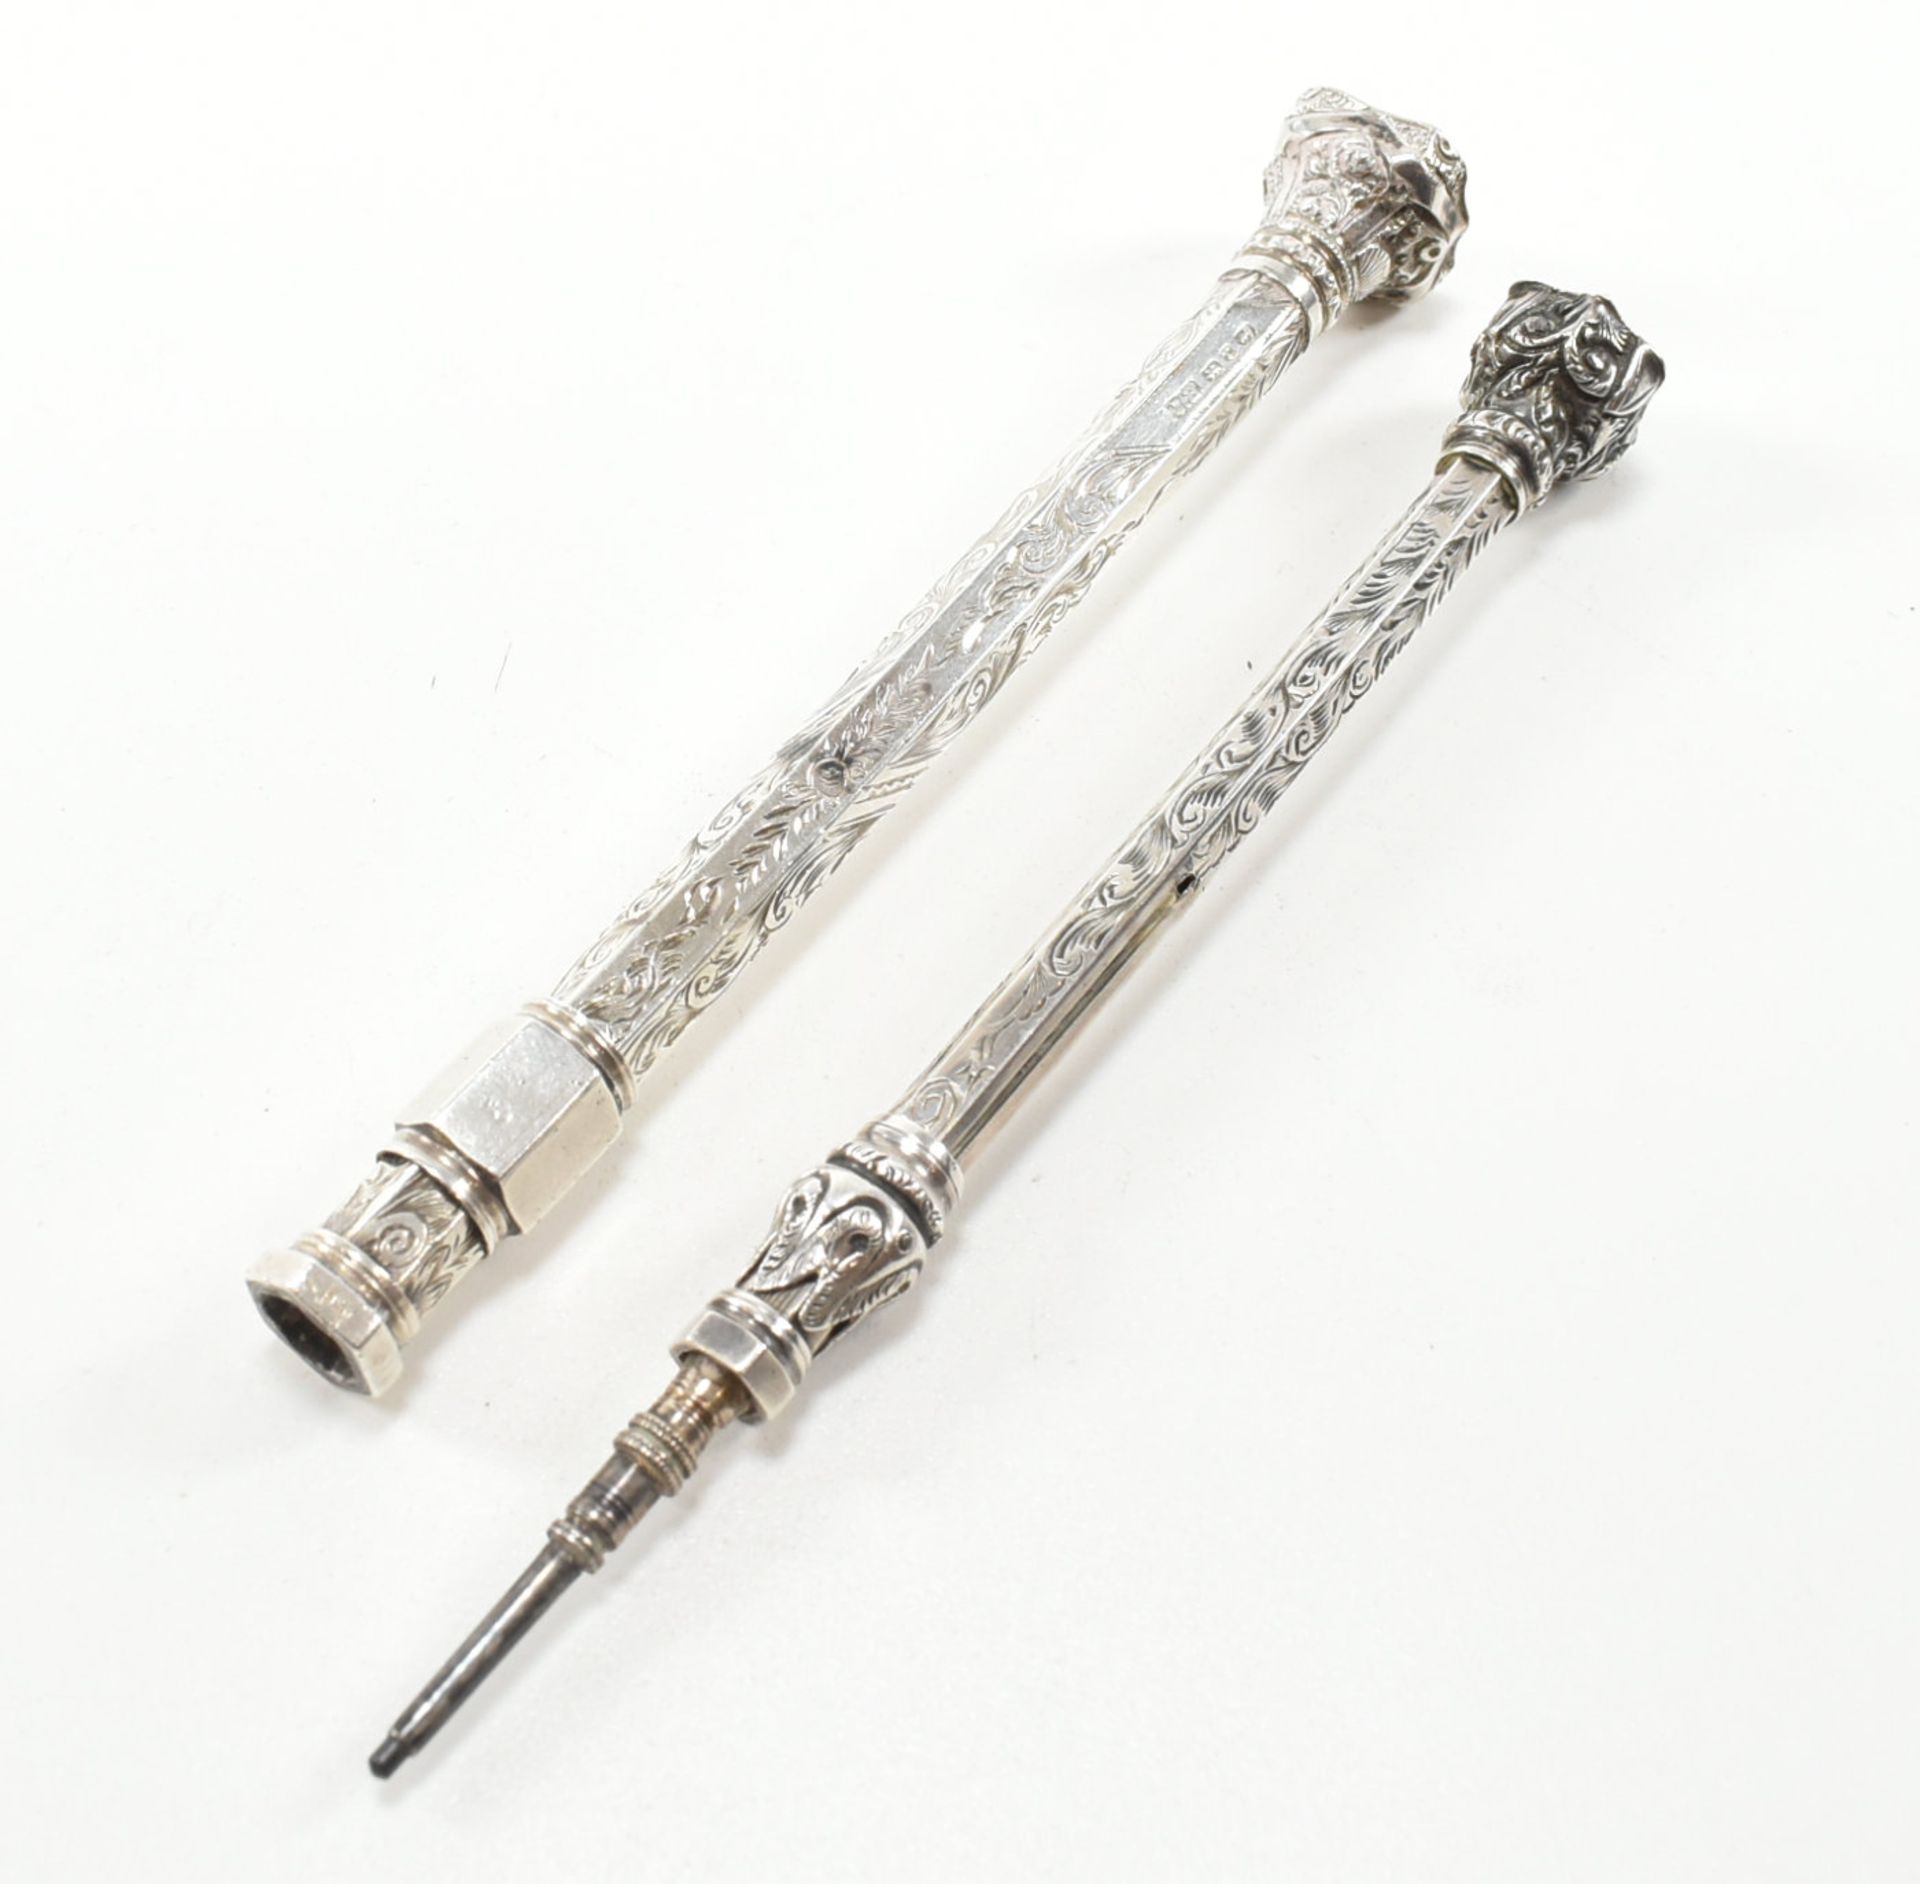 TWO SILVER PROPELLING PENCILS WITH BLOODSTONE SEALS - Image 3 of 10